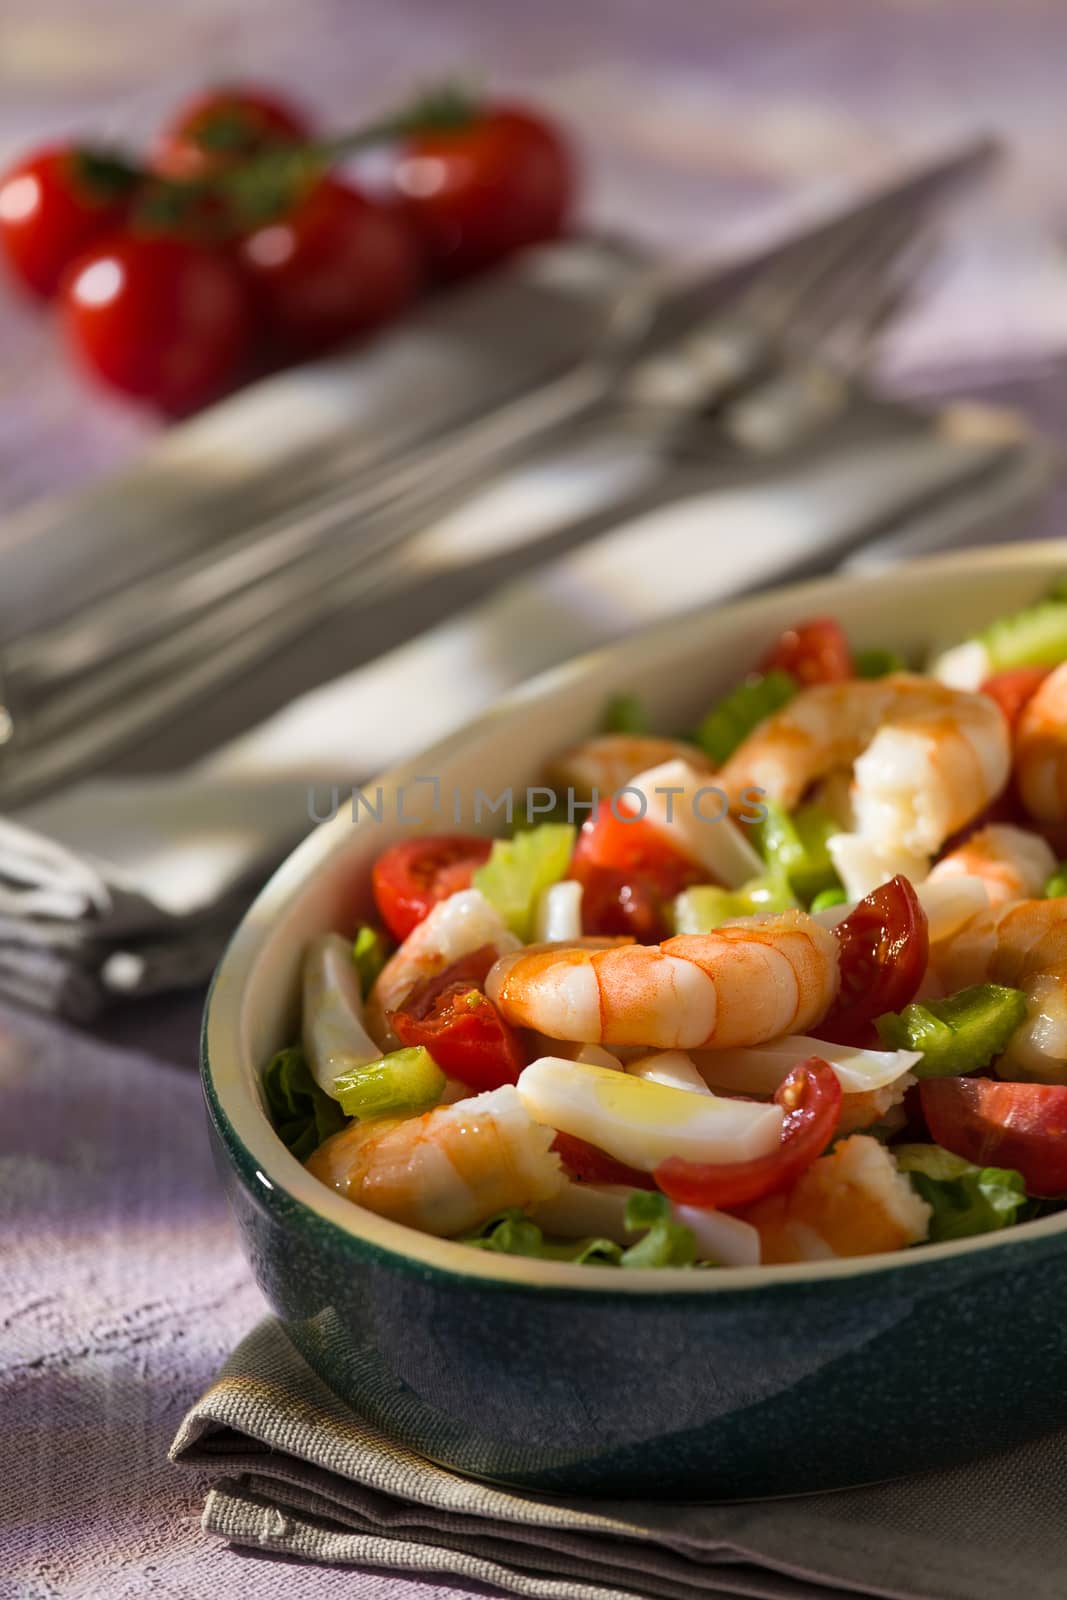 Shrimp salad with squid tomatoes celery inside an oval bowl